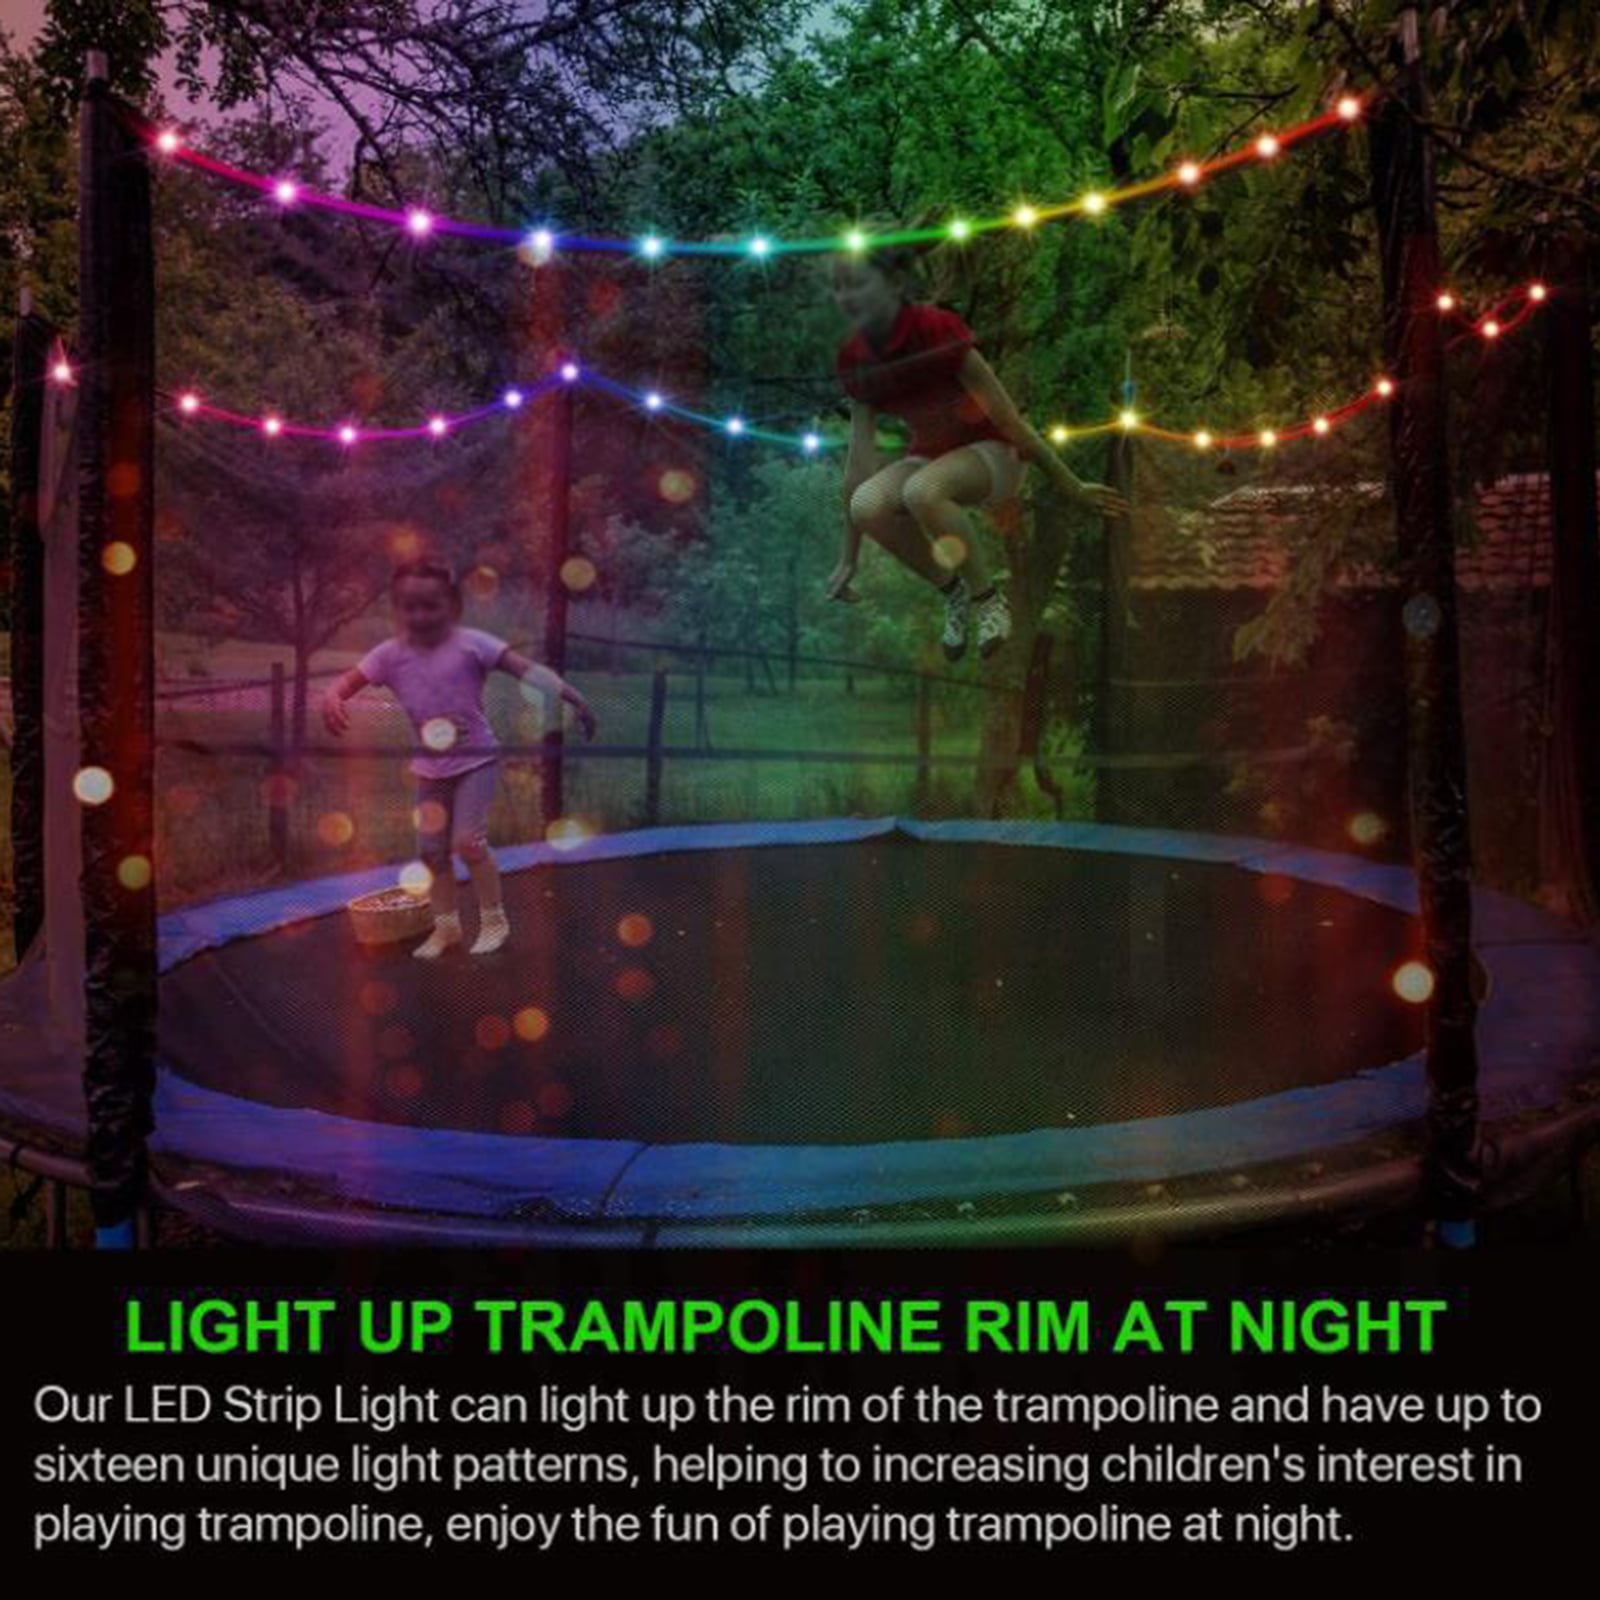 LED Trampoline Lights 32.8ft 120 Led Remote Control Trampoline Rim LED Light 16 Color Changing 8 Modes Bright to Play at Night Outdoors Waterproof Led Wire Light Trampoline Accessories 